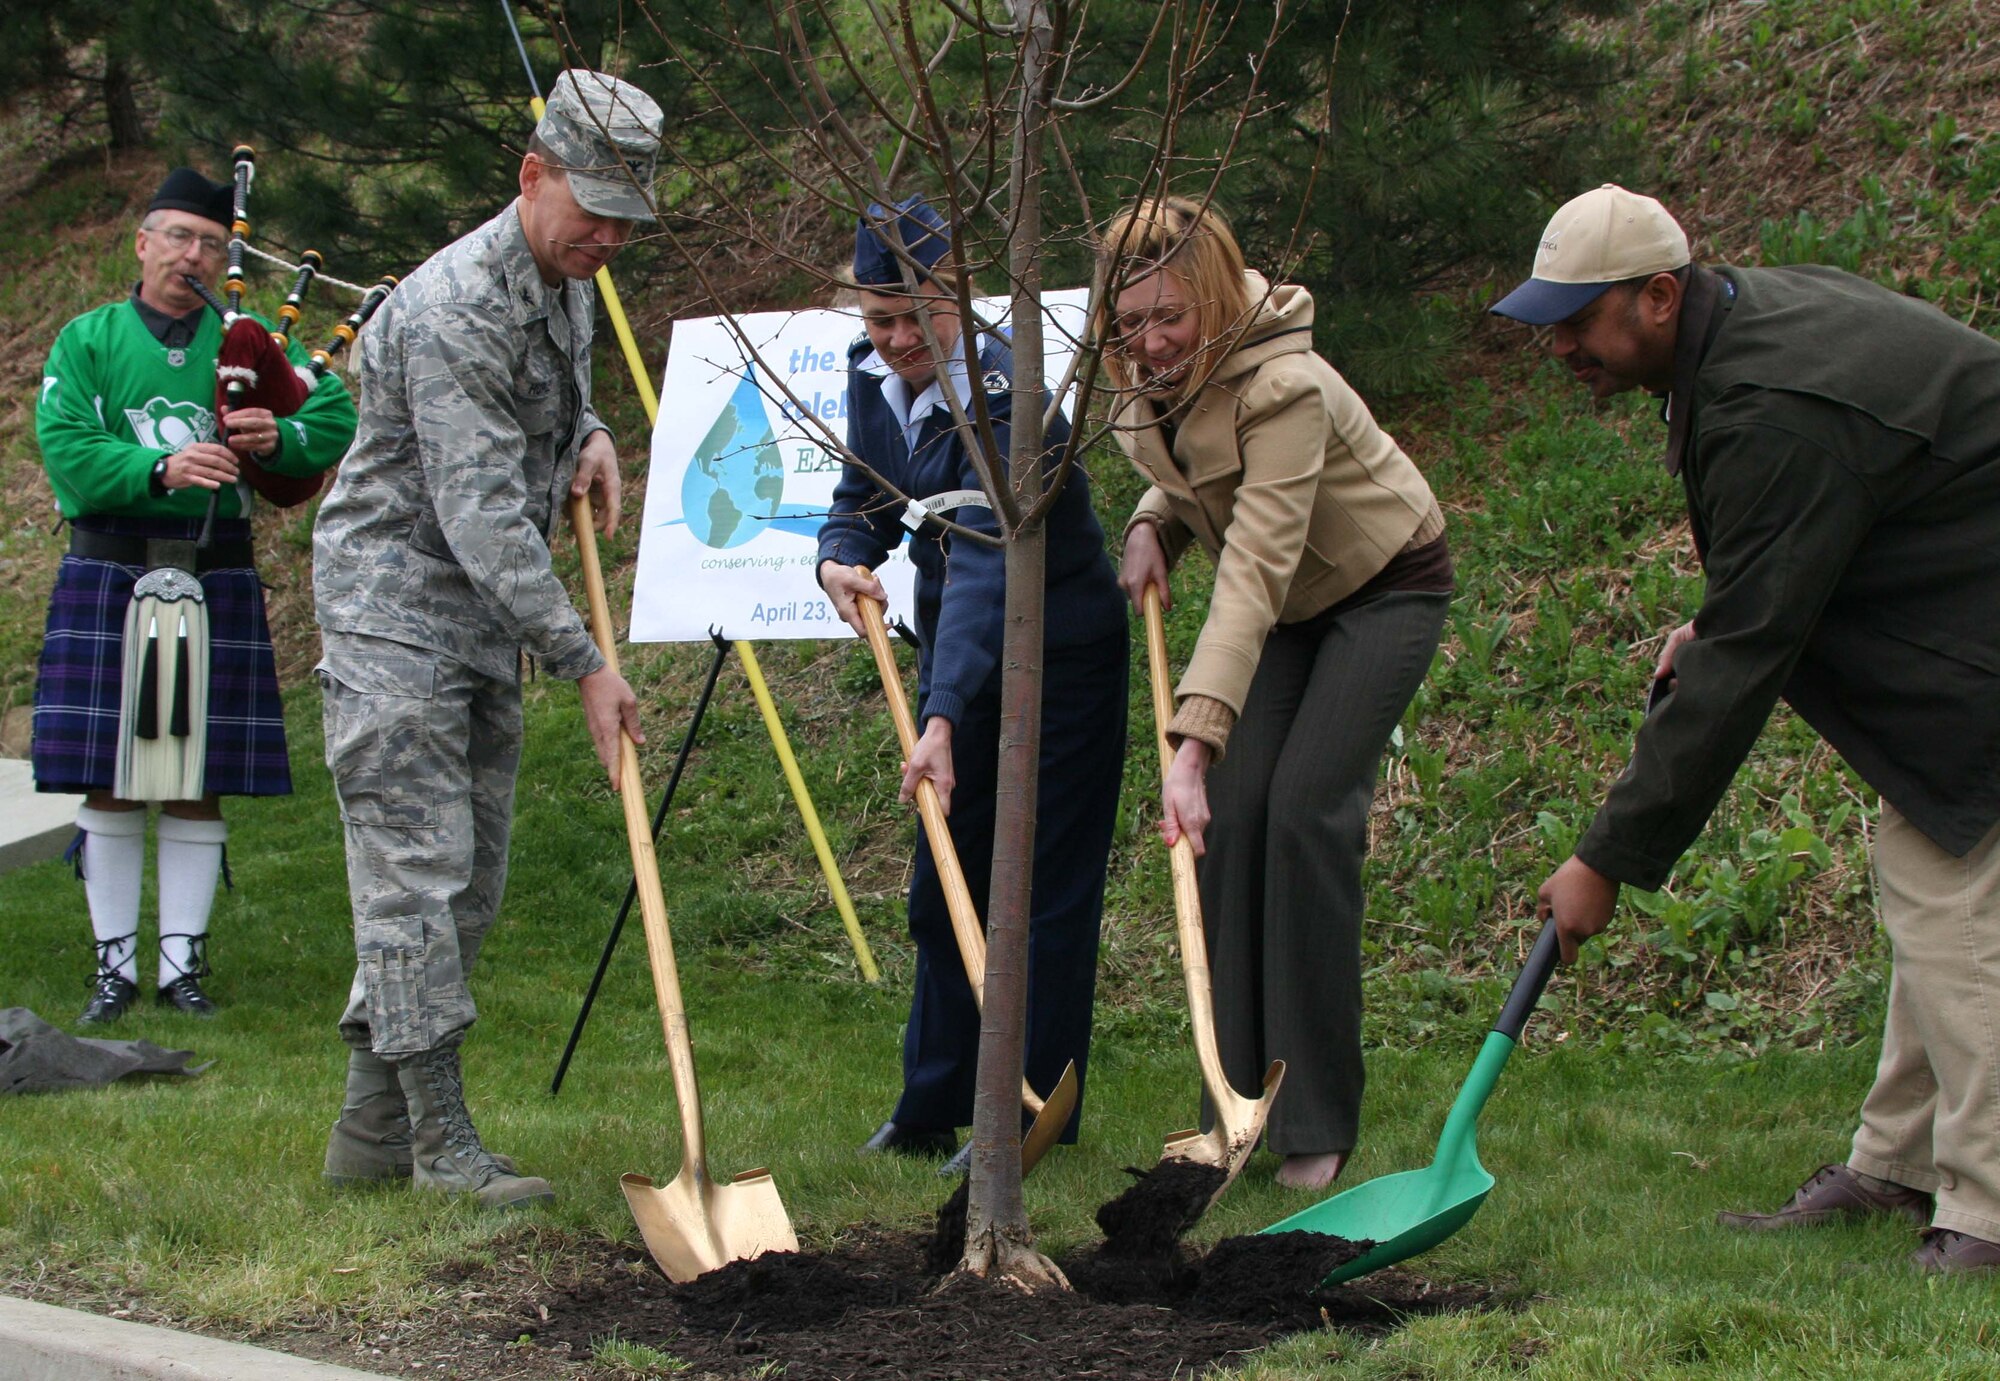 (starting from the left) Col. James Hurley, Commander of the 911th Mission Support Group; Senior Master Sgt. Cari Lennon, Health Services Manager with the 911th Aeromedical Staging Squadron ; Ms. Ashley Pennington, a contracting officer with the 911th Contracting Flight; and Mr. Adrian Mood, a civil engineer with the 911th Civil Engineering Flight put the finishing touches on planting a tree here, April 23, 2009, in recognition of Earth Day. This represented the 14th Annual Tree Planting Ceremony held here.  Mr. Robert Clifford, 911th Civil Engineers, adds some background music with the bagpipes.(photo by Staff. Sgt Roberto Modelo)